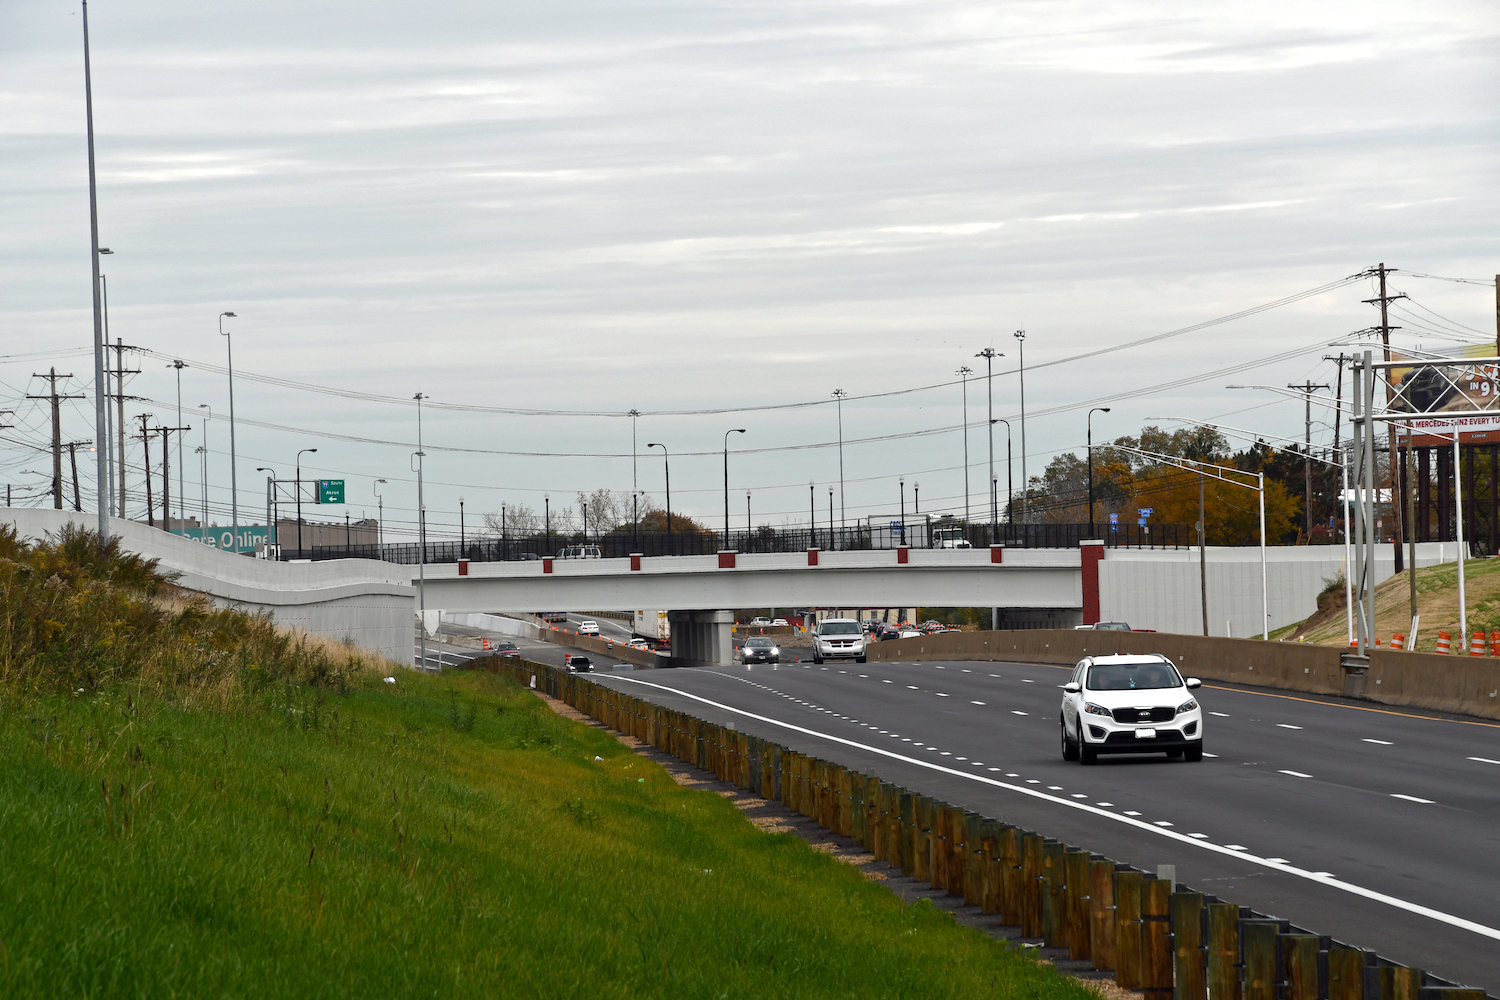 White bridge, with red brick accents over multiple lane highway with several cars.